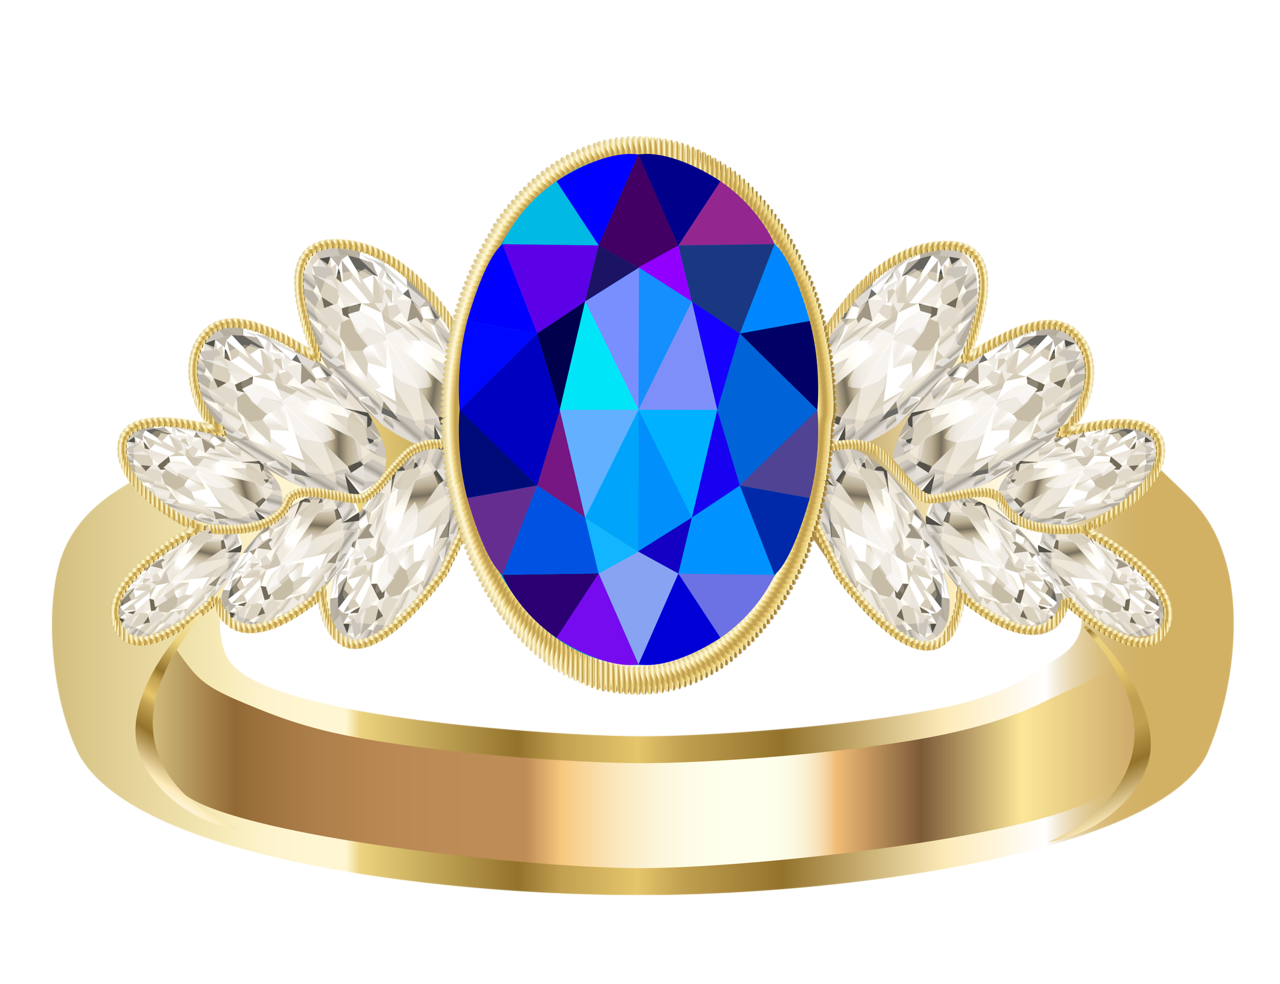 Jewelry clipart sapphire ring. Perfumes makes j ias